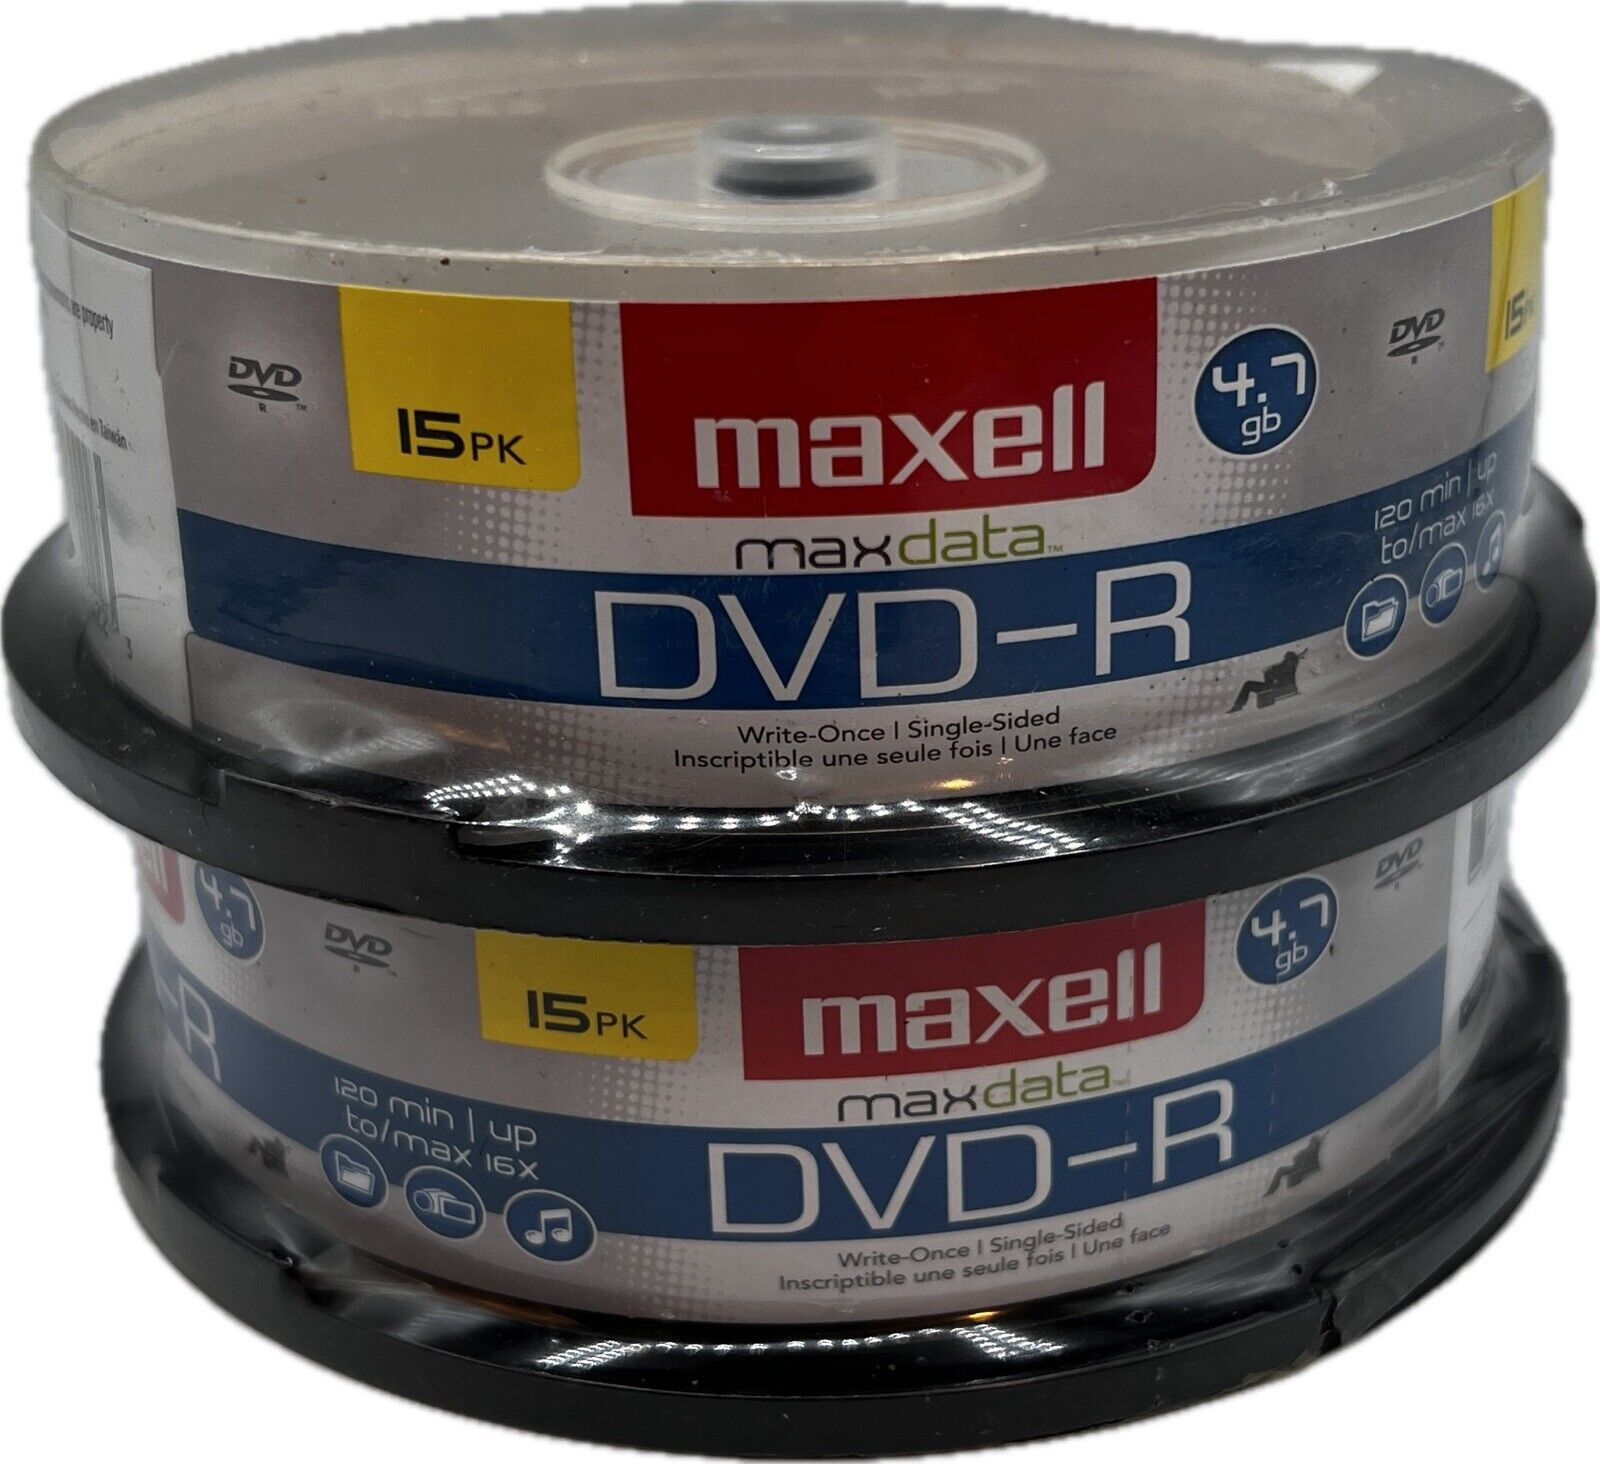 2x Maxell DVD-R 4.7GB Write-Once, 16x Recordable Disc (Spindle Pack of 15) NEW